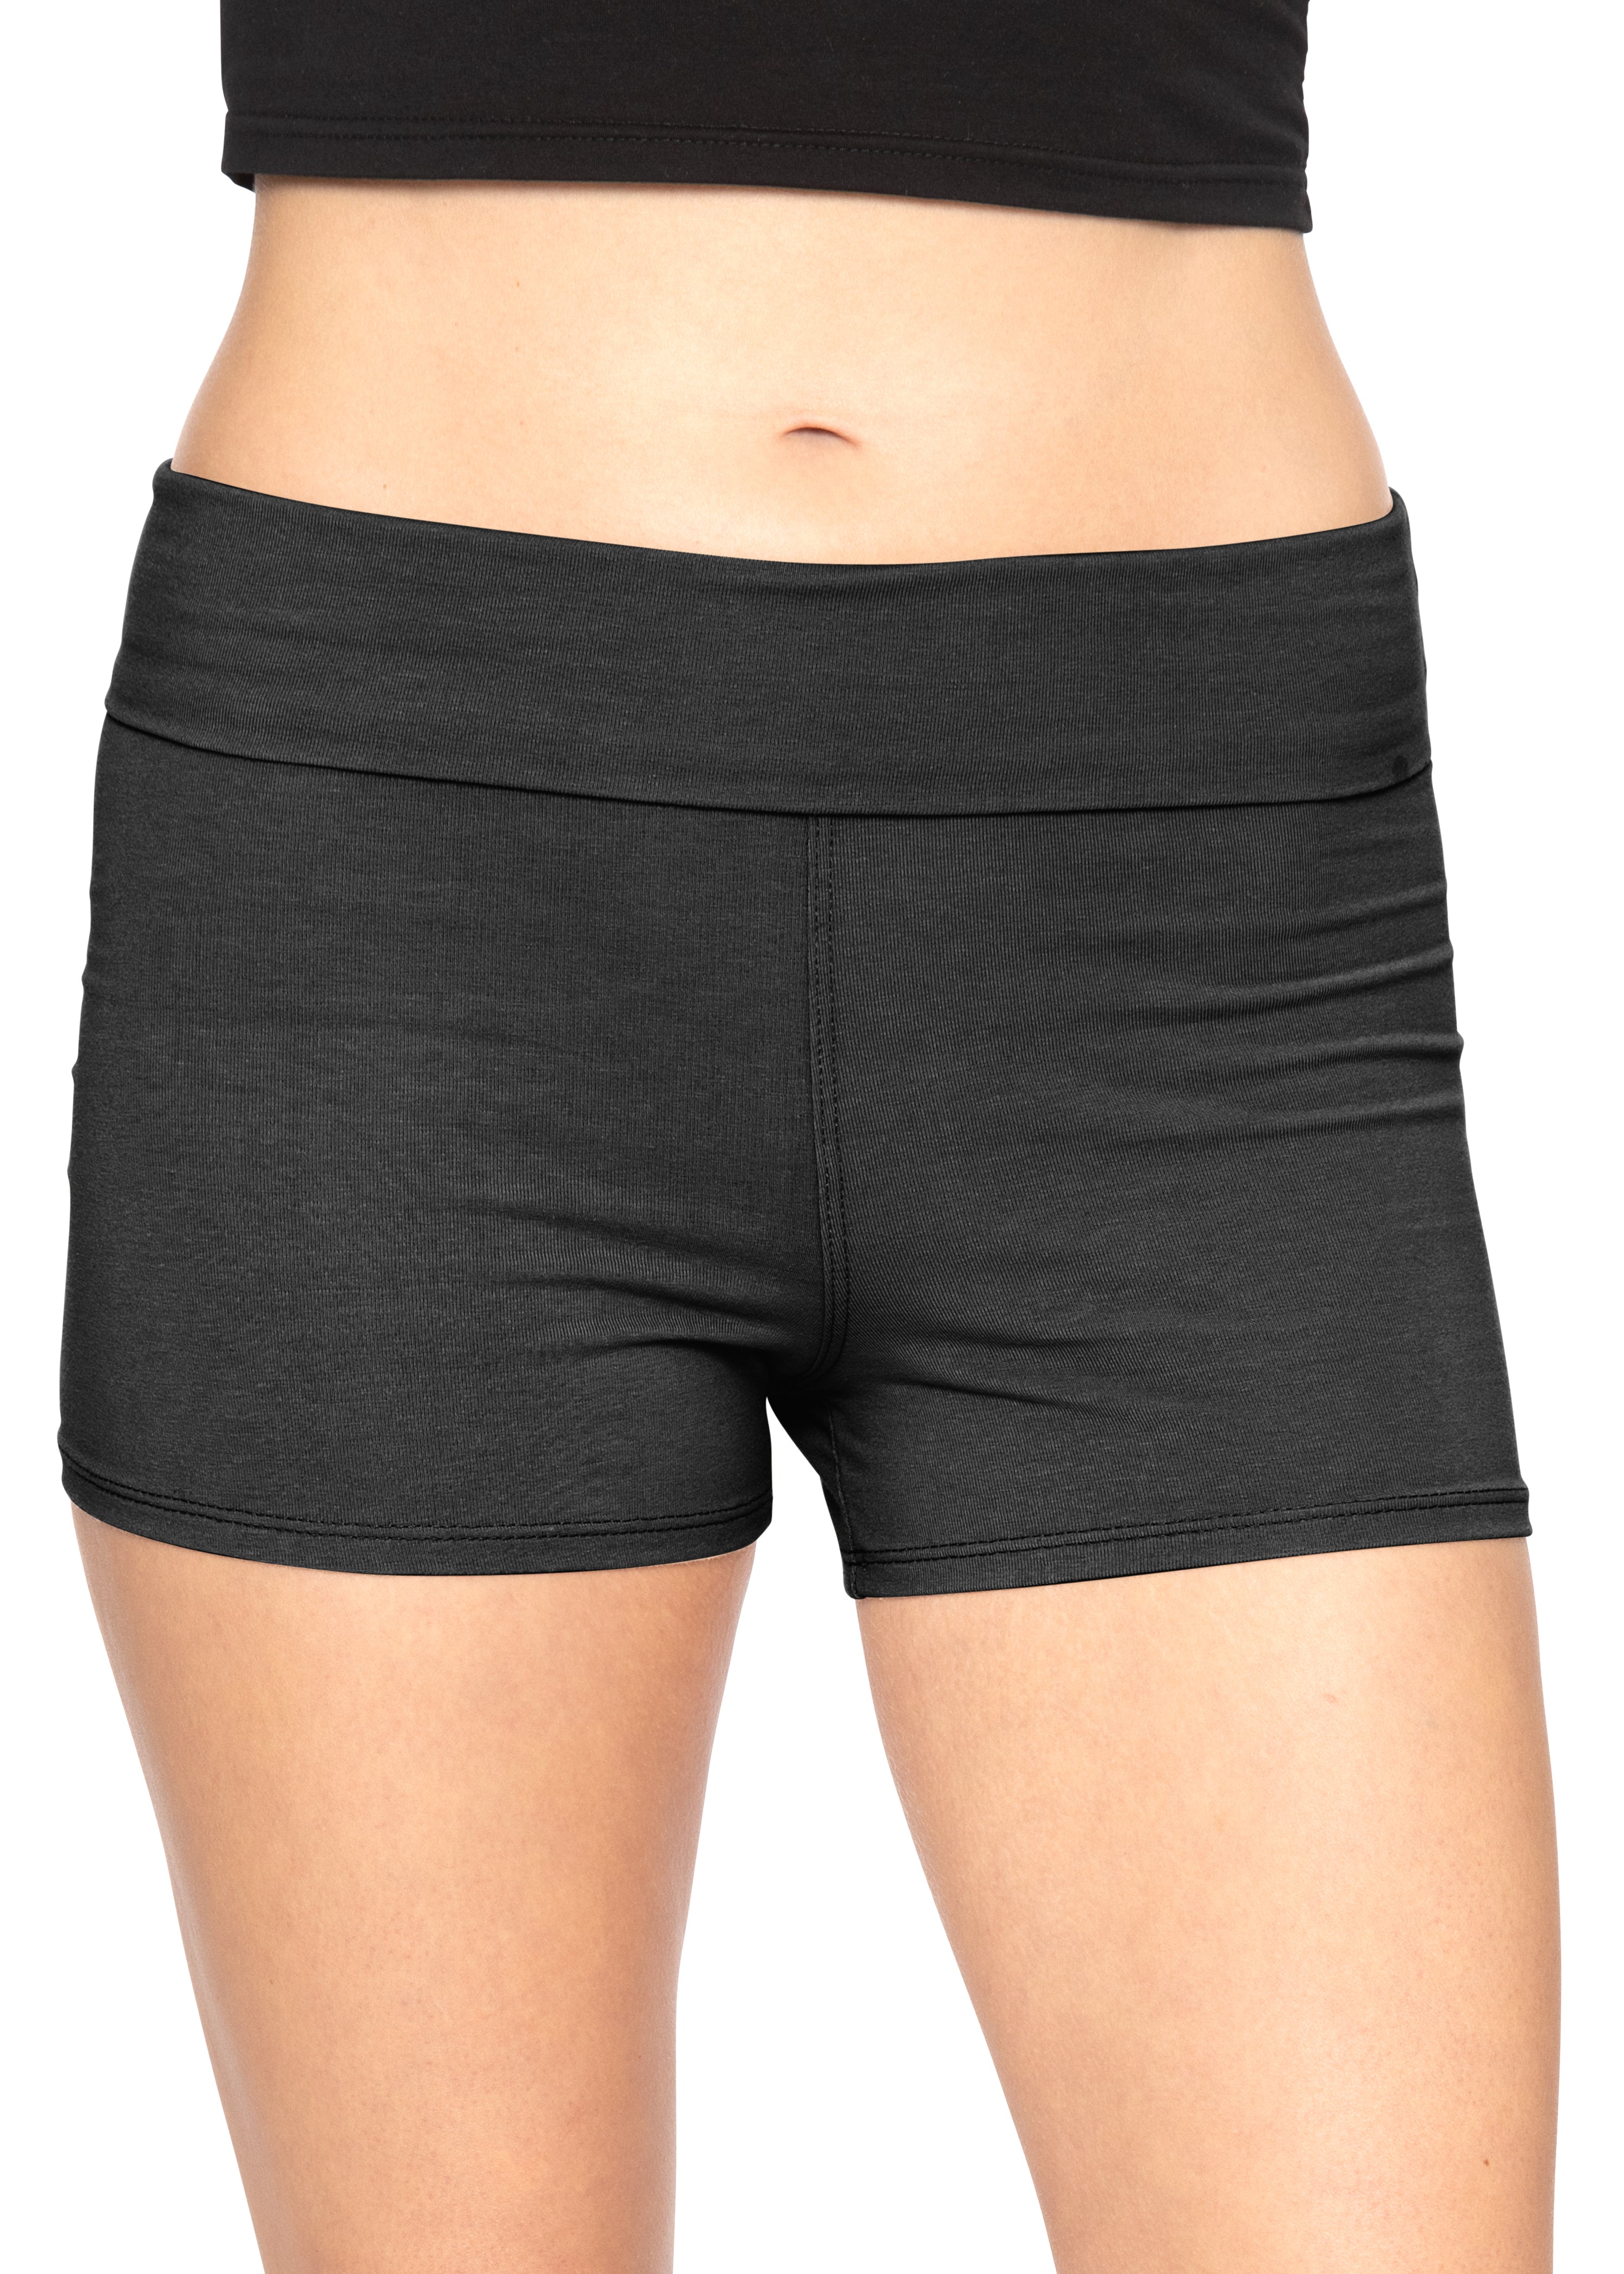 Stretch Is Comfort Women's Teamwear Foldover Yoga Shorts | Adult Small - 3x - image 1 of 6